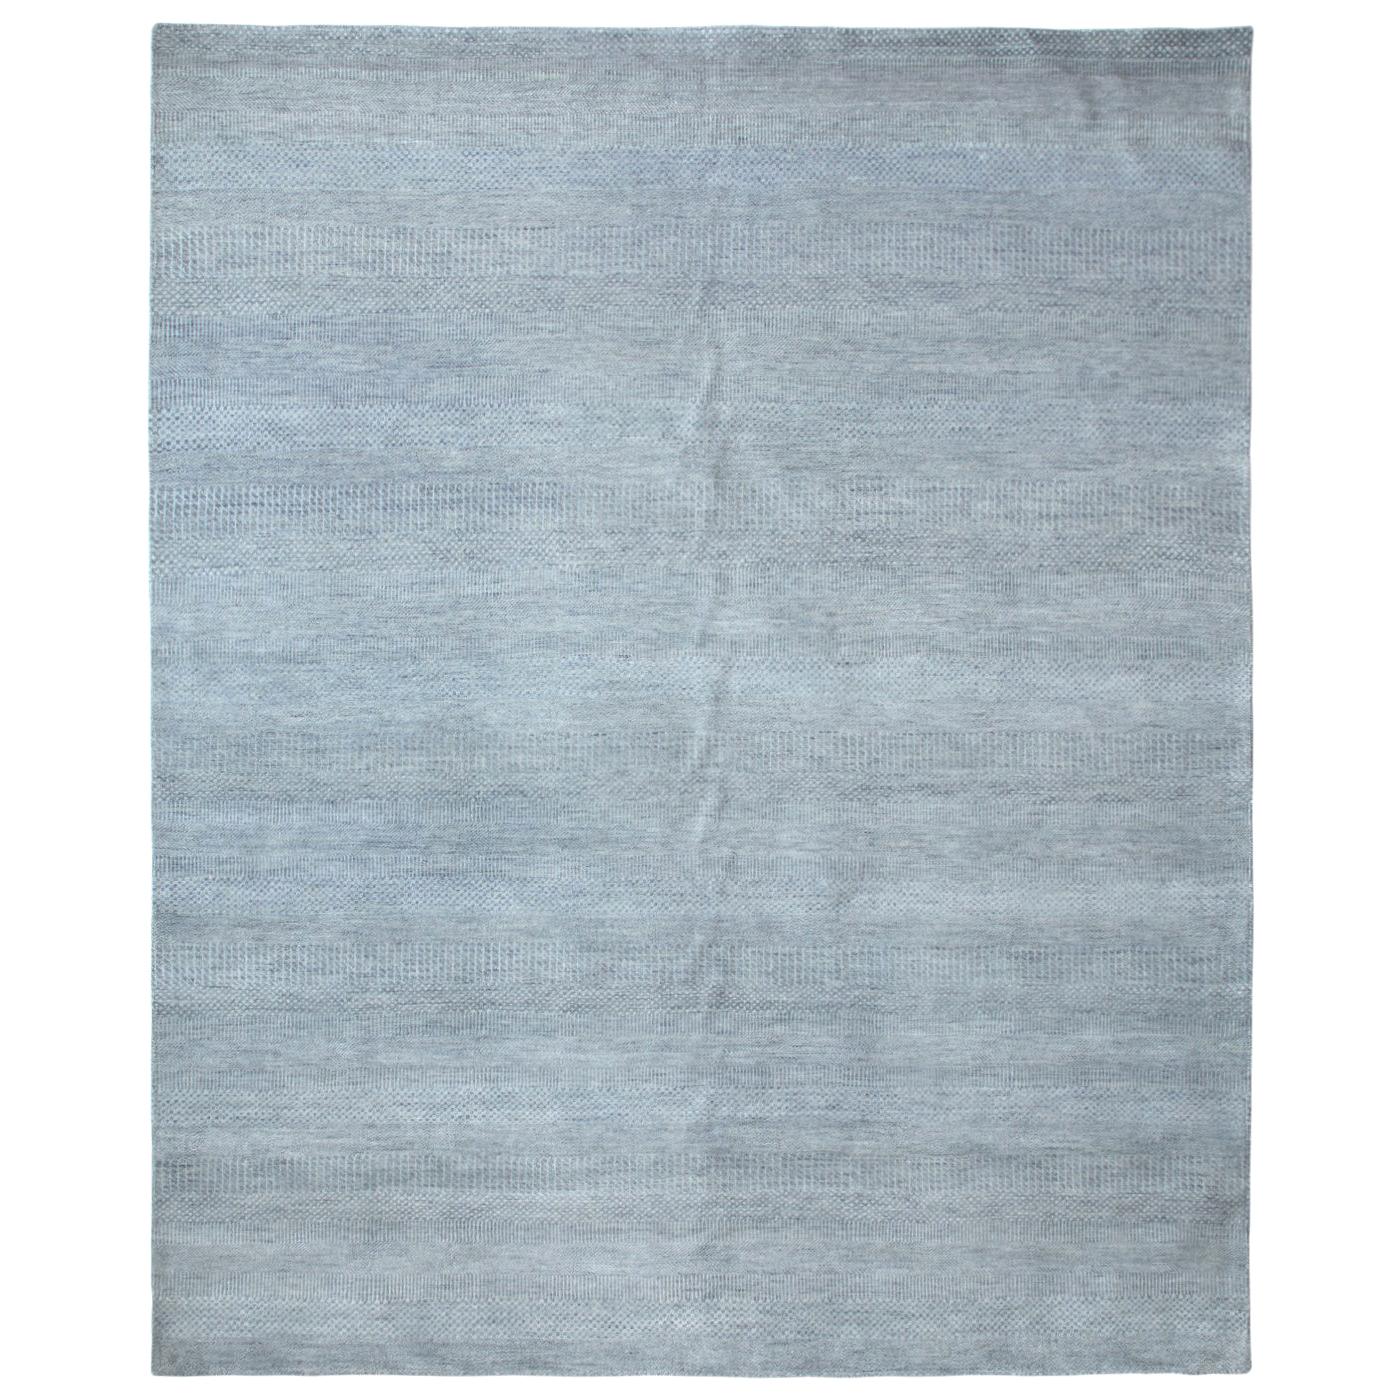 One of a Kind Solid Wool Viscose Blend Hand Loomed Area Rug, Mist